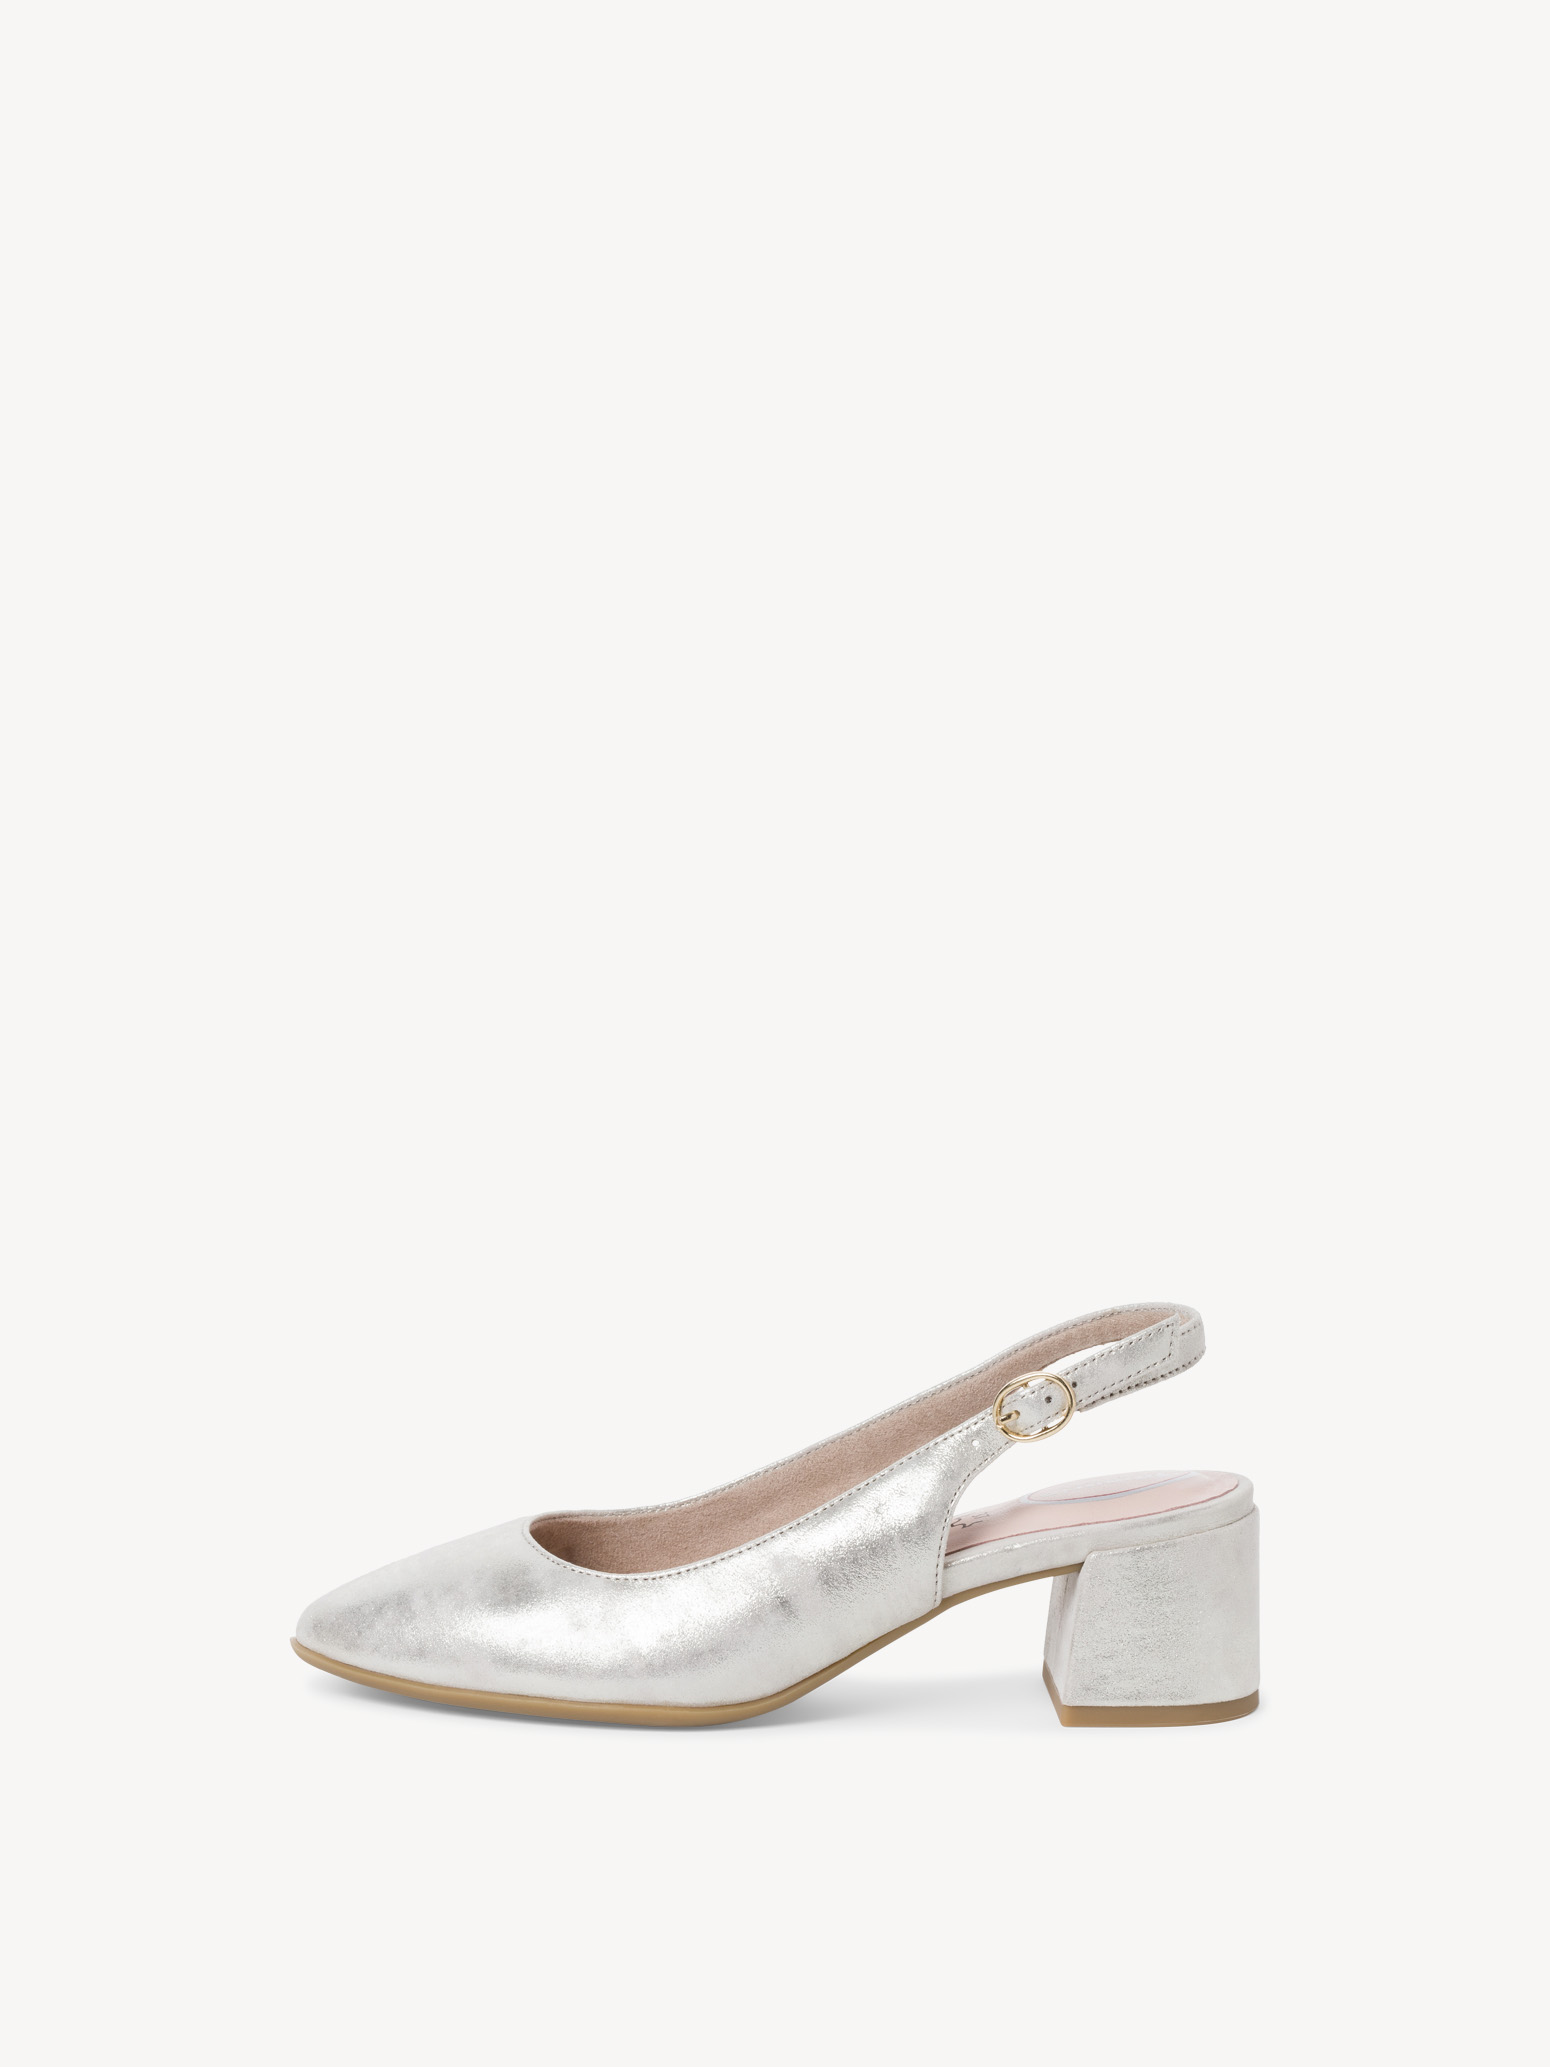 Leather sling pumps - metallic, CLOUDY GOLD, hi-res